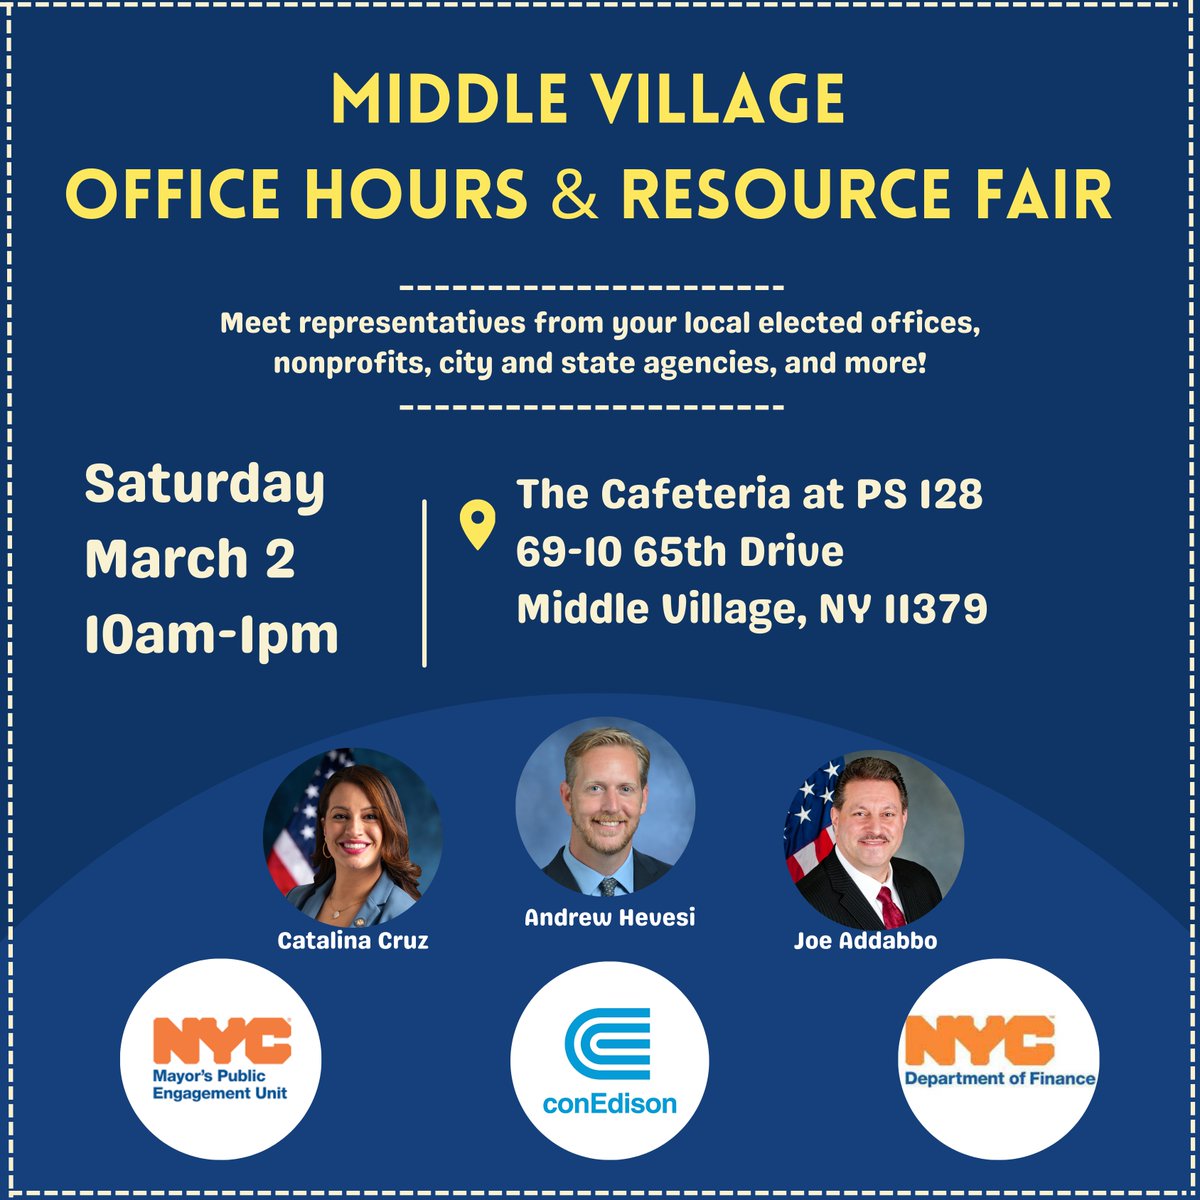 Middle Village! Reminder of our mobile office hours taking place tomorrow (3/2) from 10am-1pm at PS 128, in partnership with @CatalinaCruzNY @SenJoeAddabbo @ConEdison @NYCFinance and @MayorsPEU. Email hevesia@nyassembly.gov with any questions, we hope to see you there!